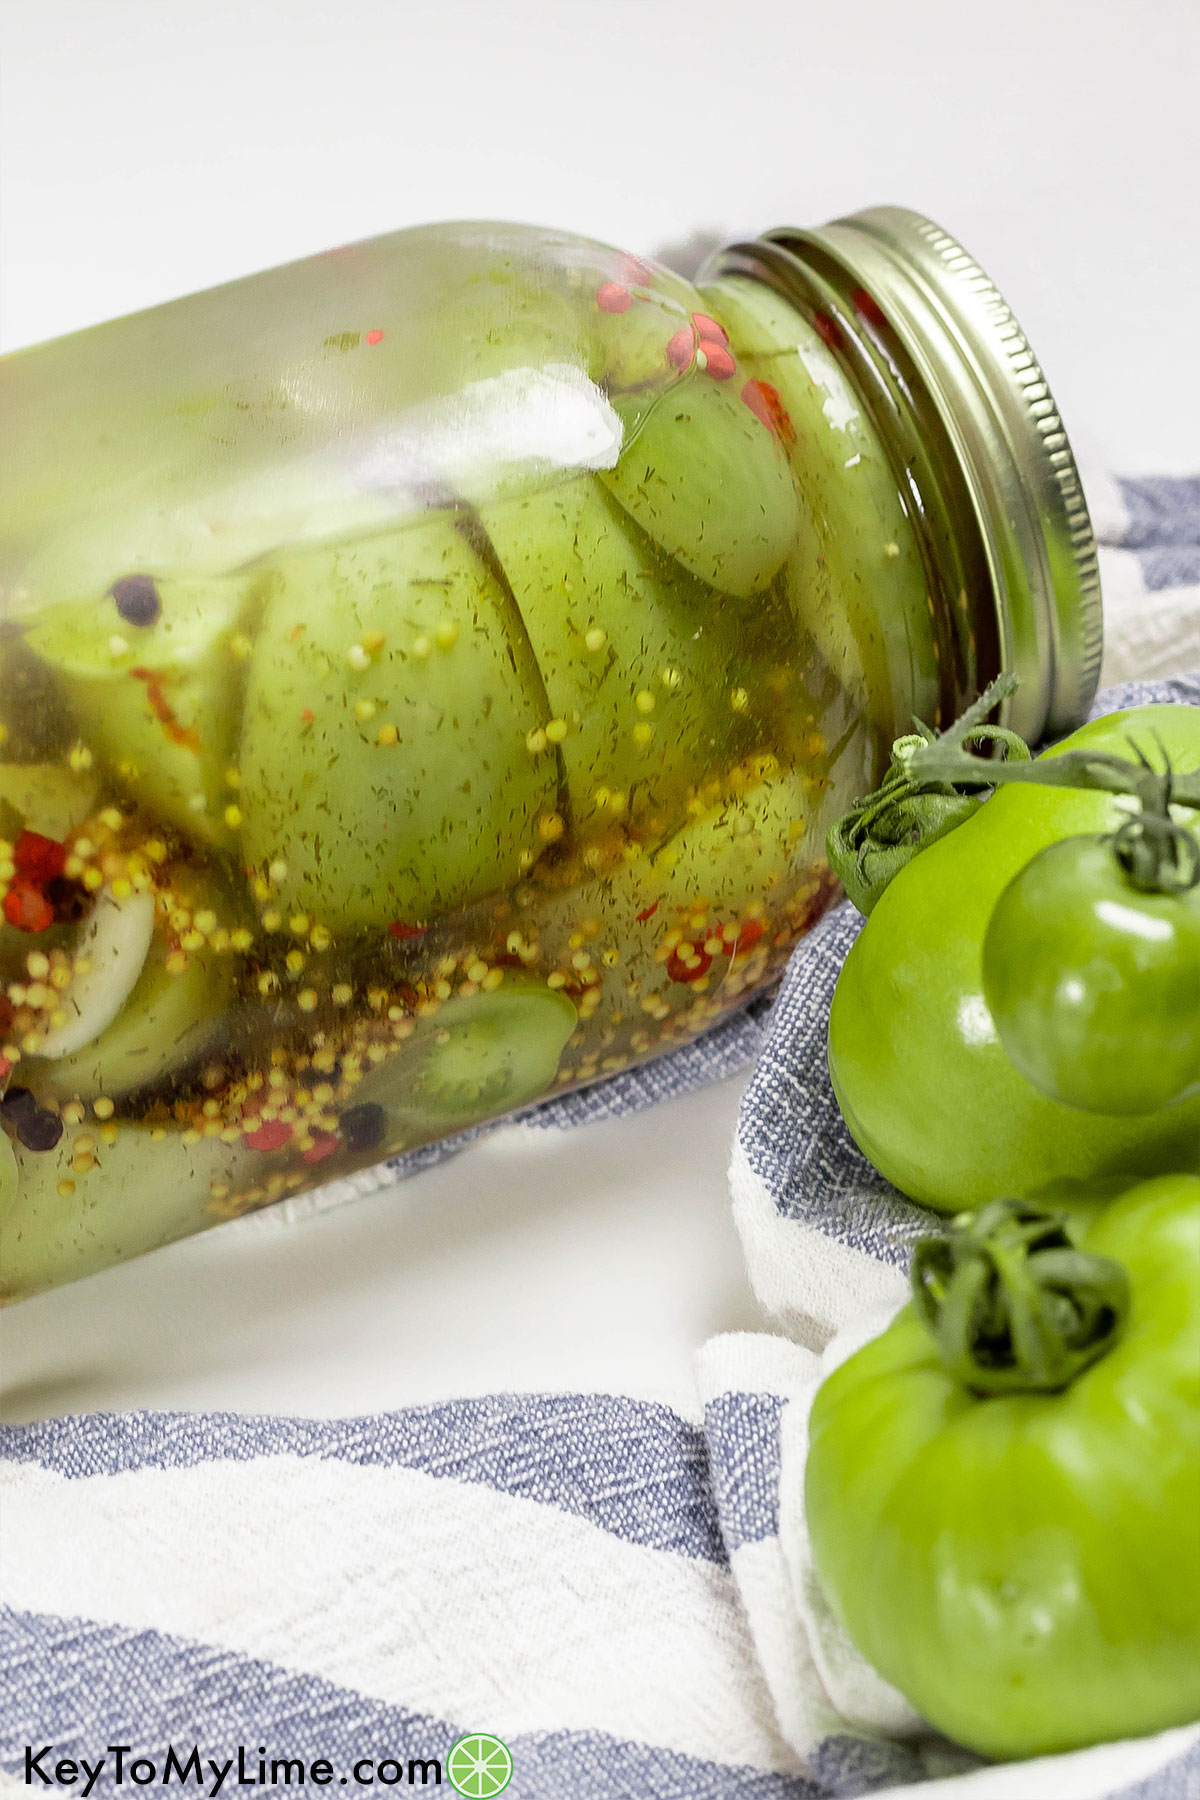 A close up of a jar of pickled tomatoes showing the peppercorn mixture.